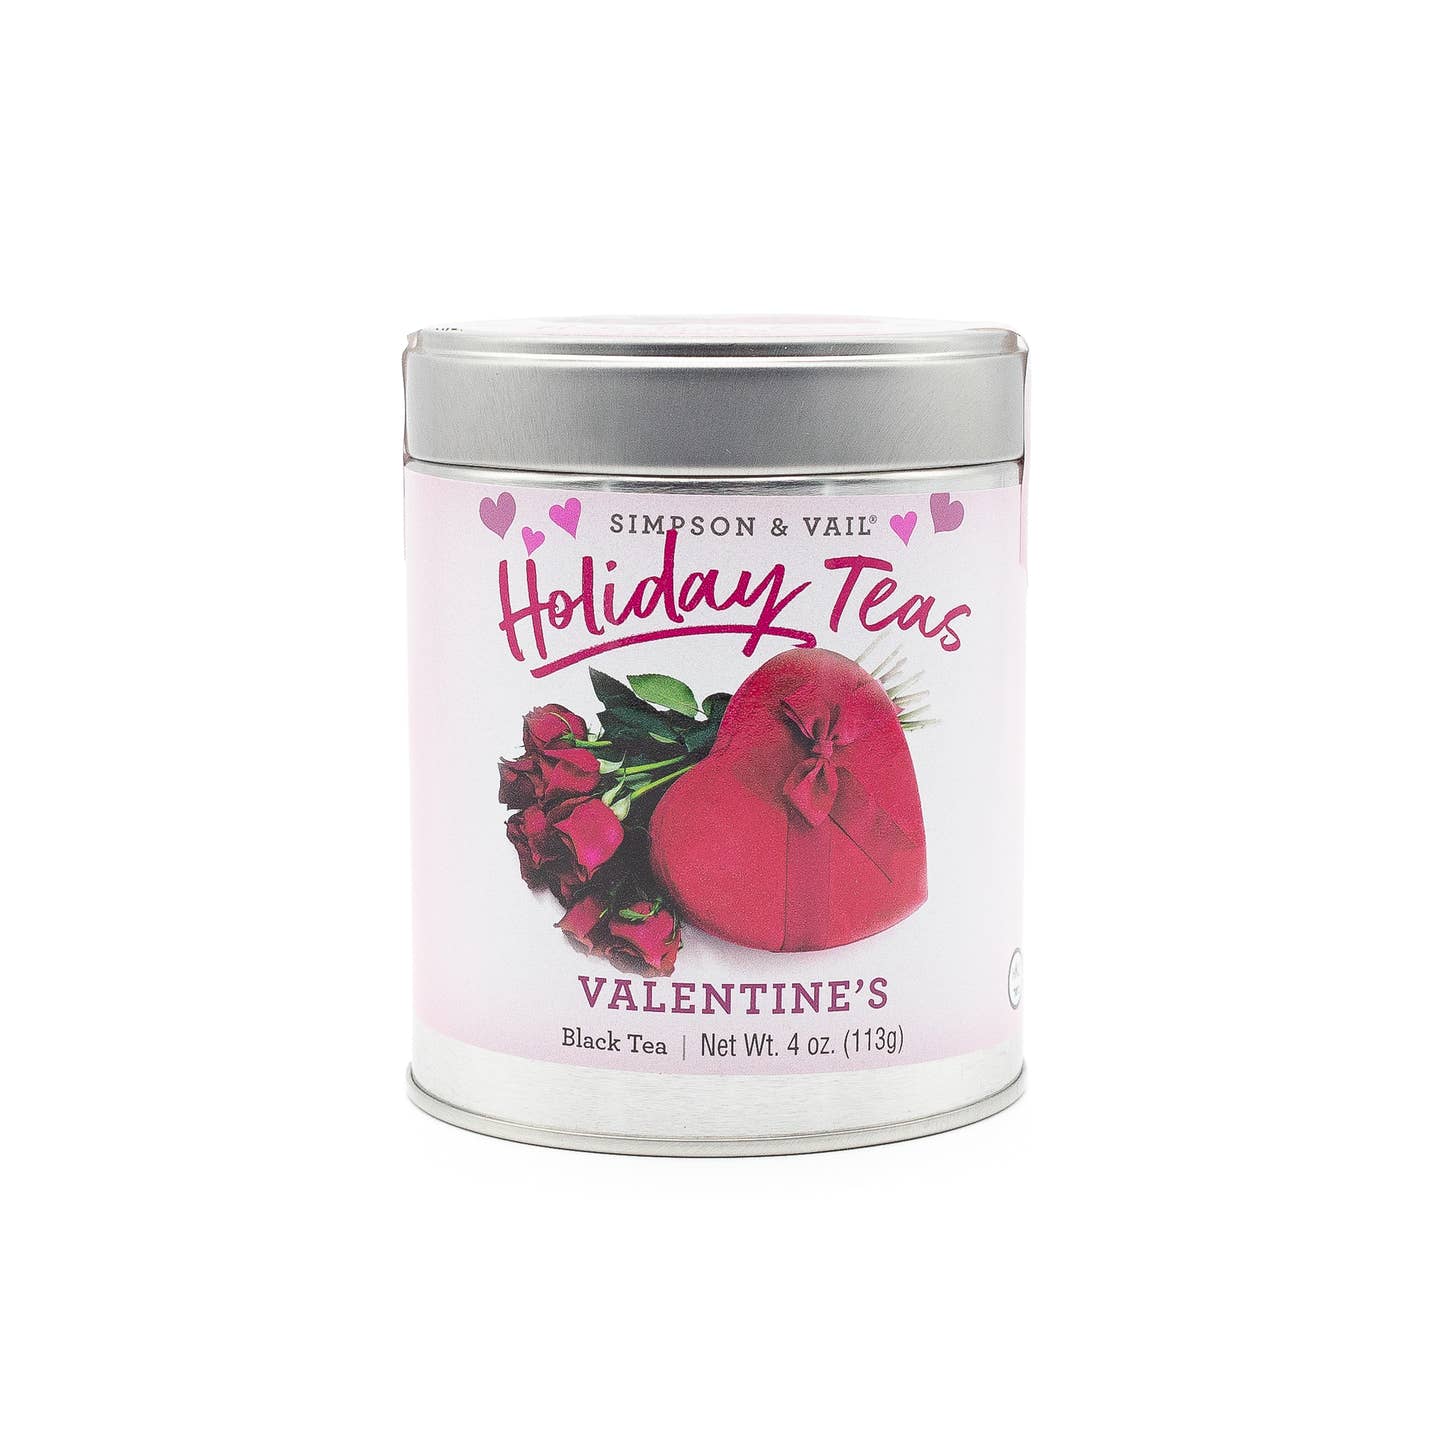 Valentine's Tea Blend tea tin printed with roses and hearts by Simpson & Vail